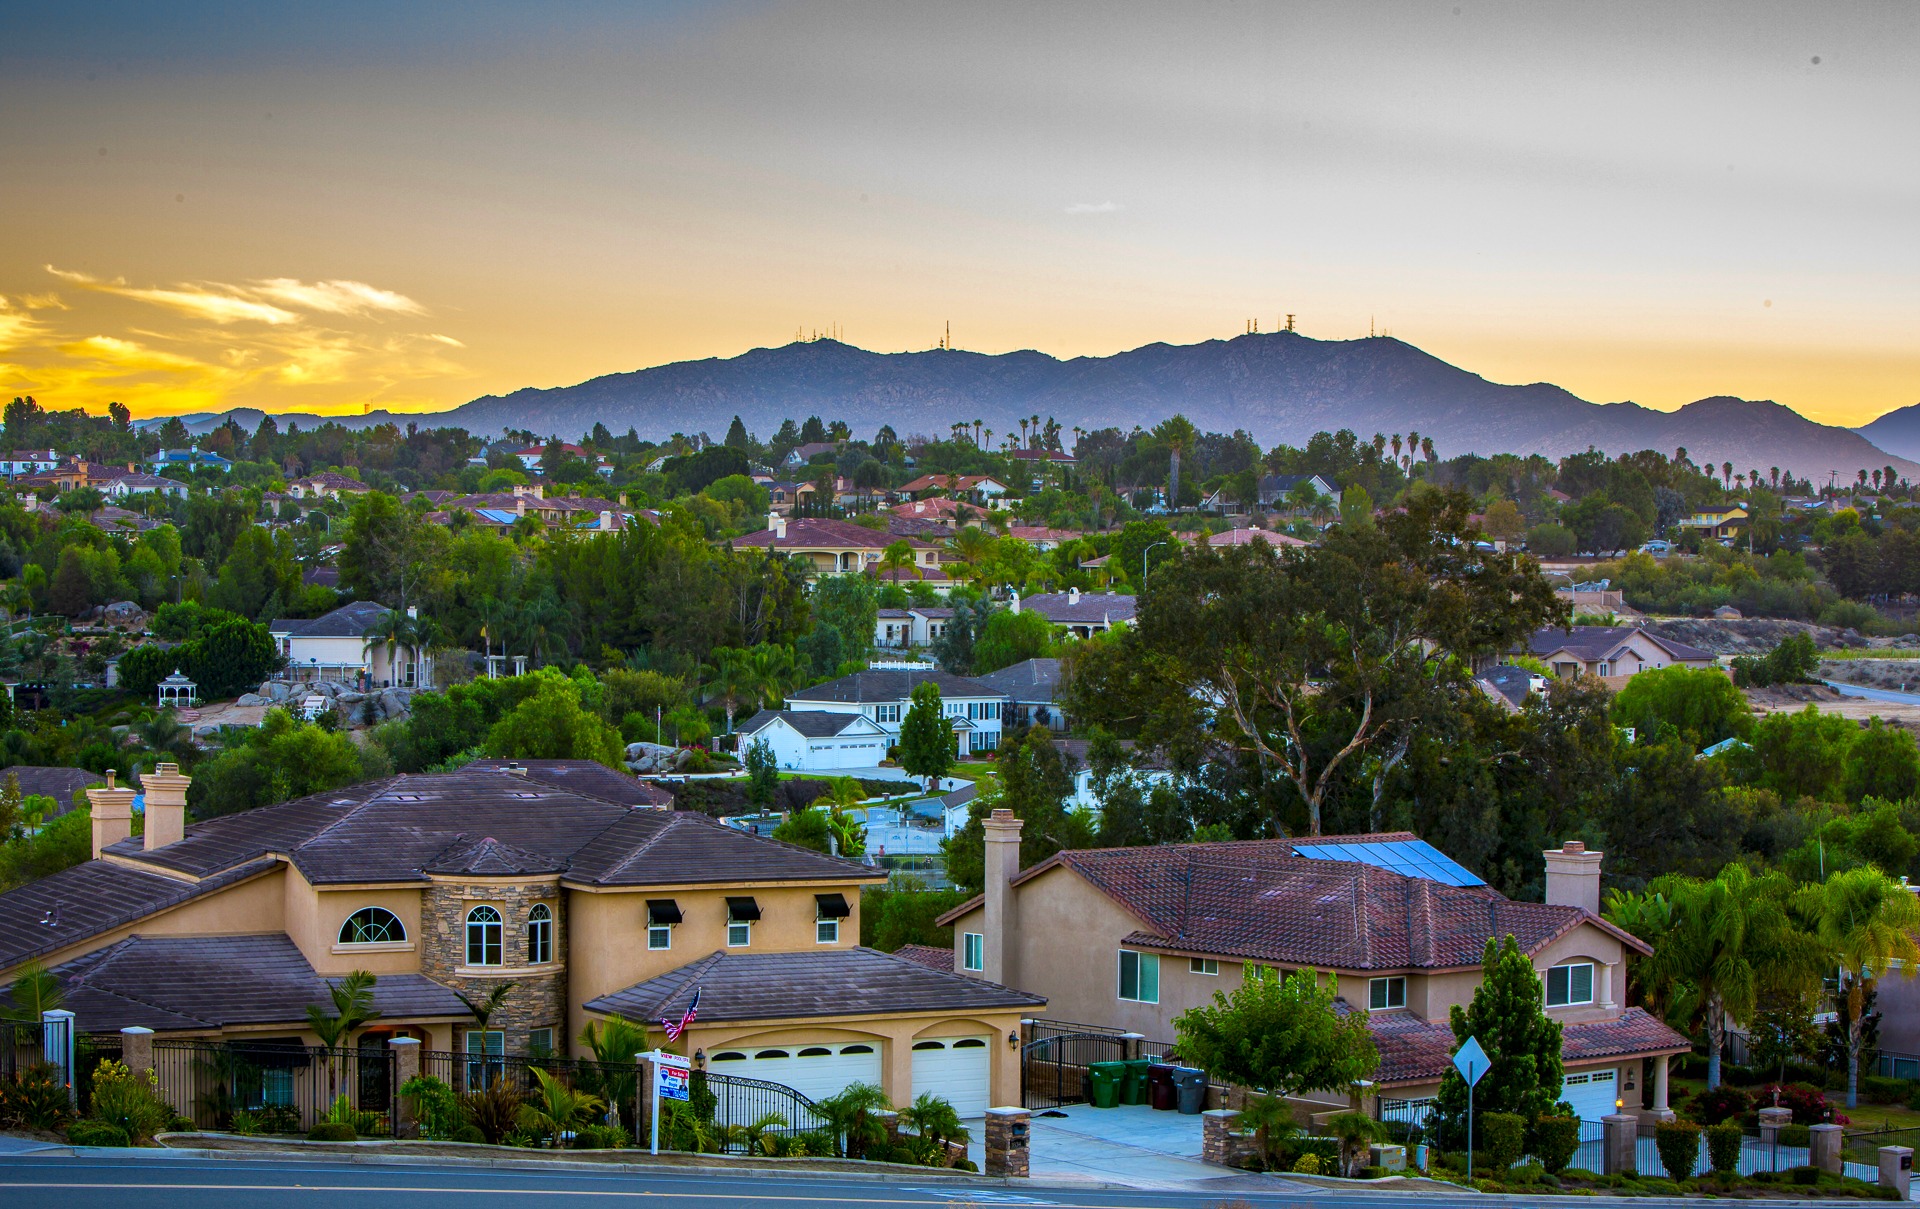 As prices continue to rise, as historically they always do, the last frontier has become Southern California’s Inland Empire.